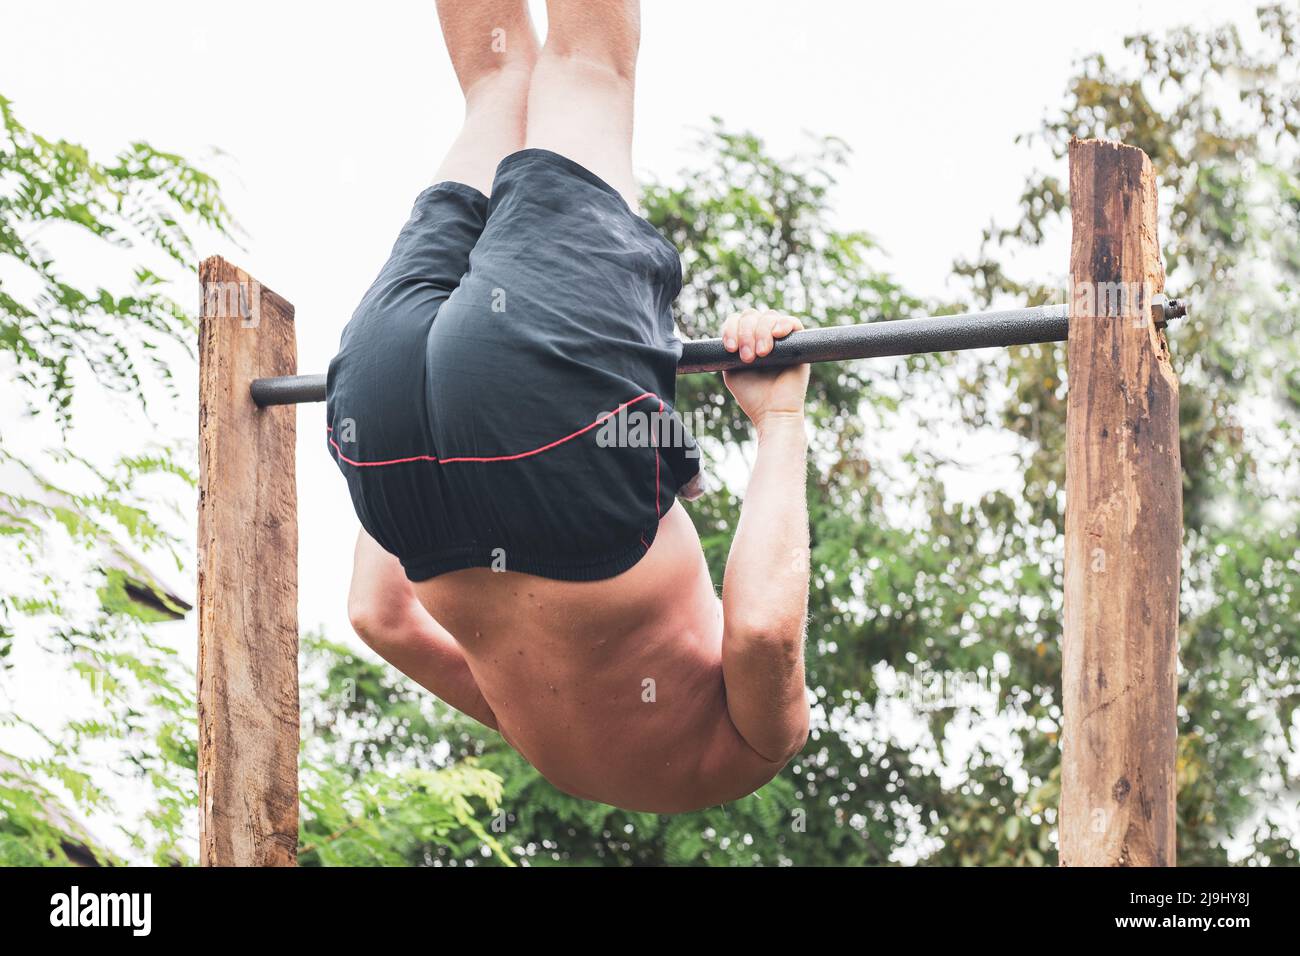 A mature man goes in for sports on a horizontal bar, somersaults and hangs upside down. Active lifestyle in retirement. Stock Photo